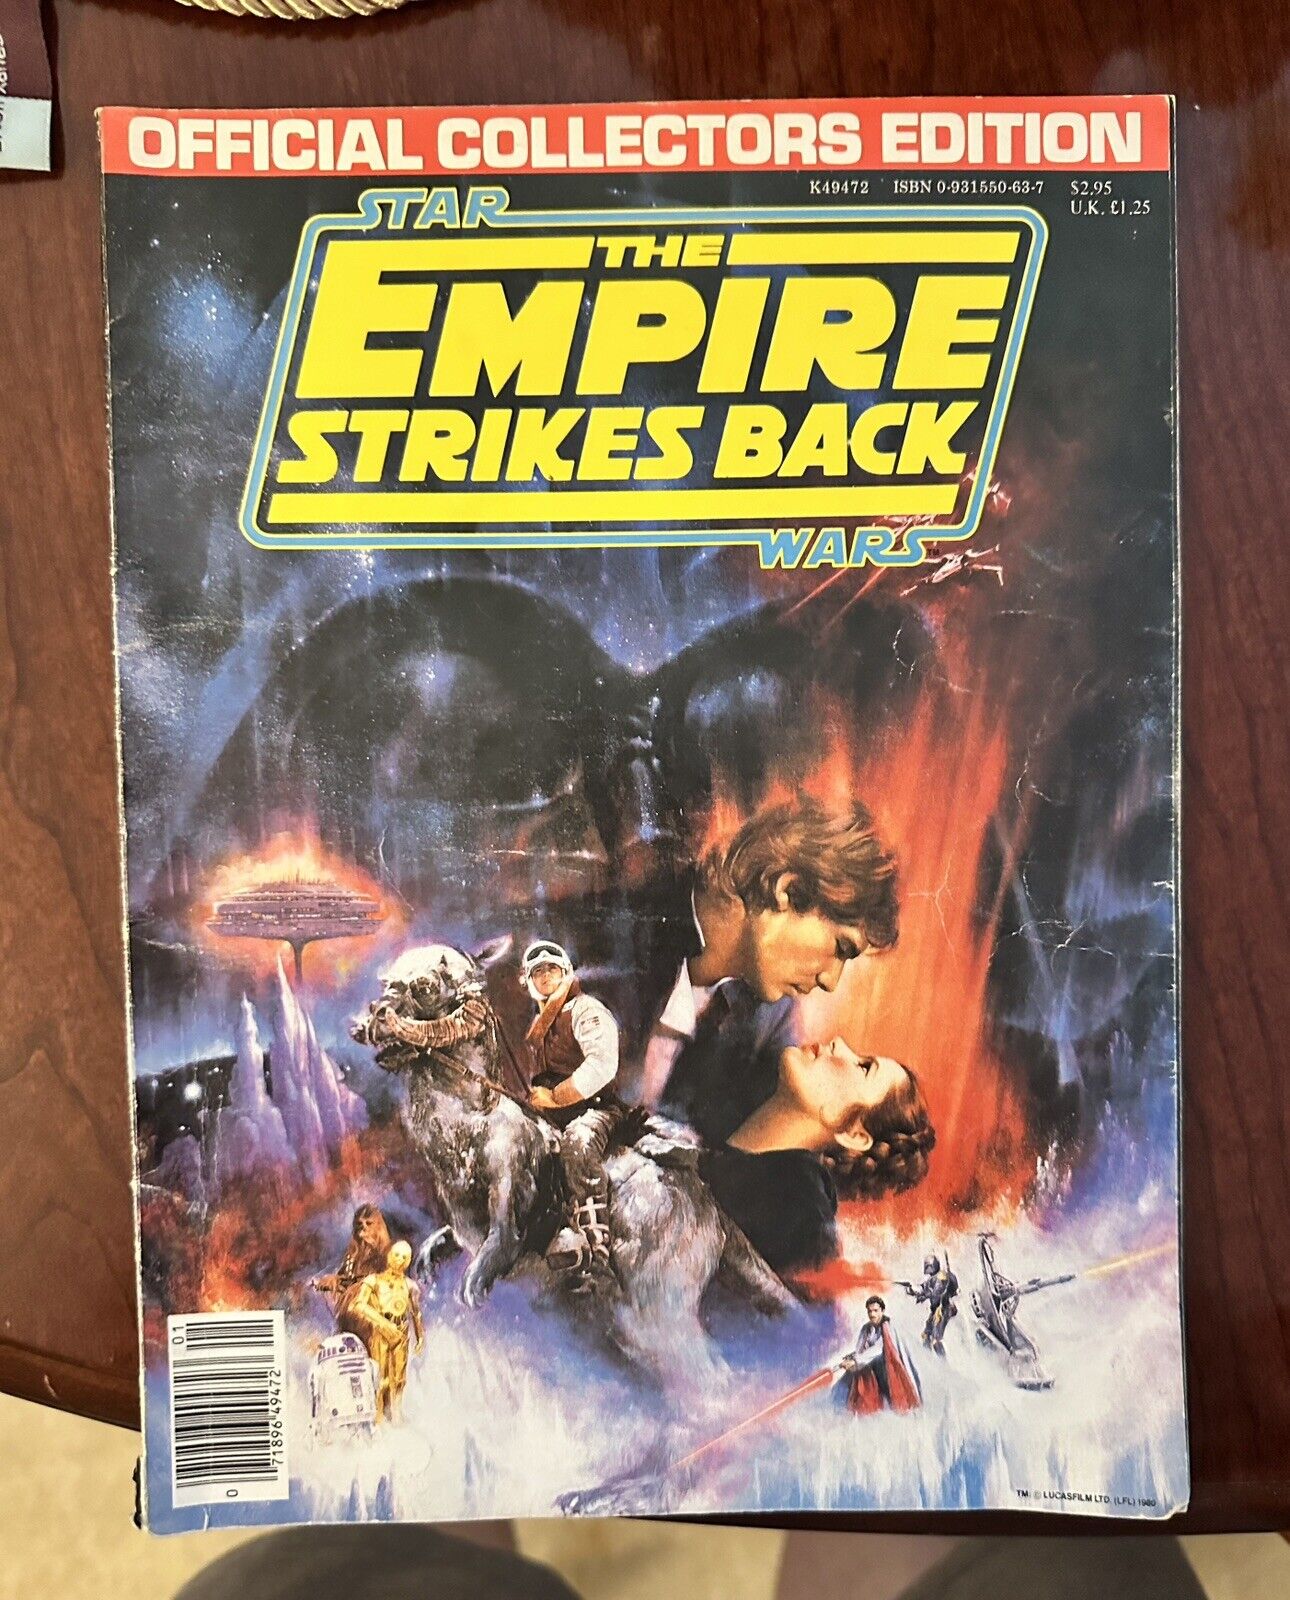 STAR WARS The Empire Strikes Back Official Collectors Edition ISBN 0-931550-63-7